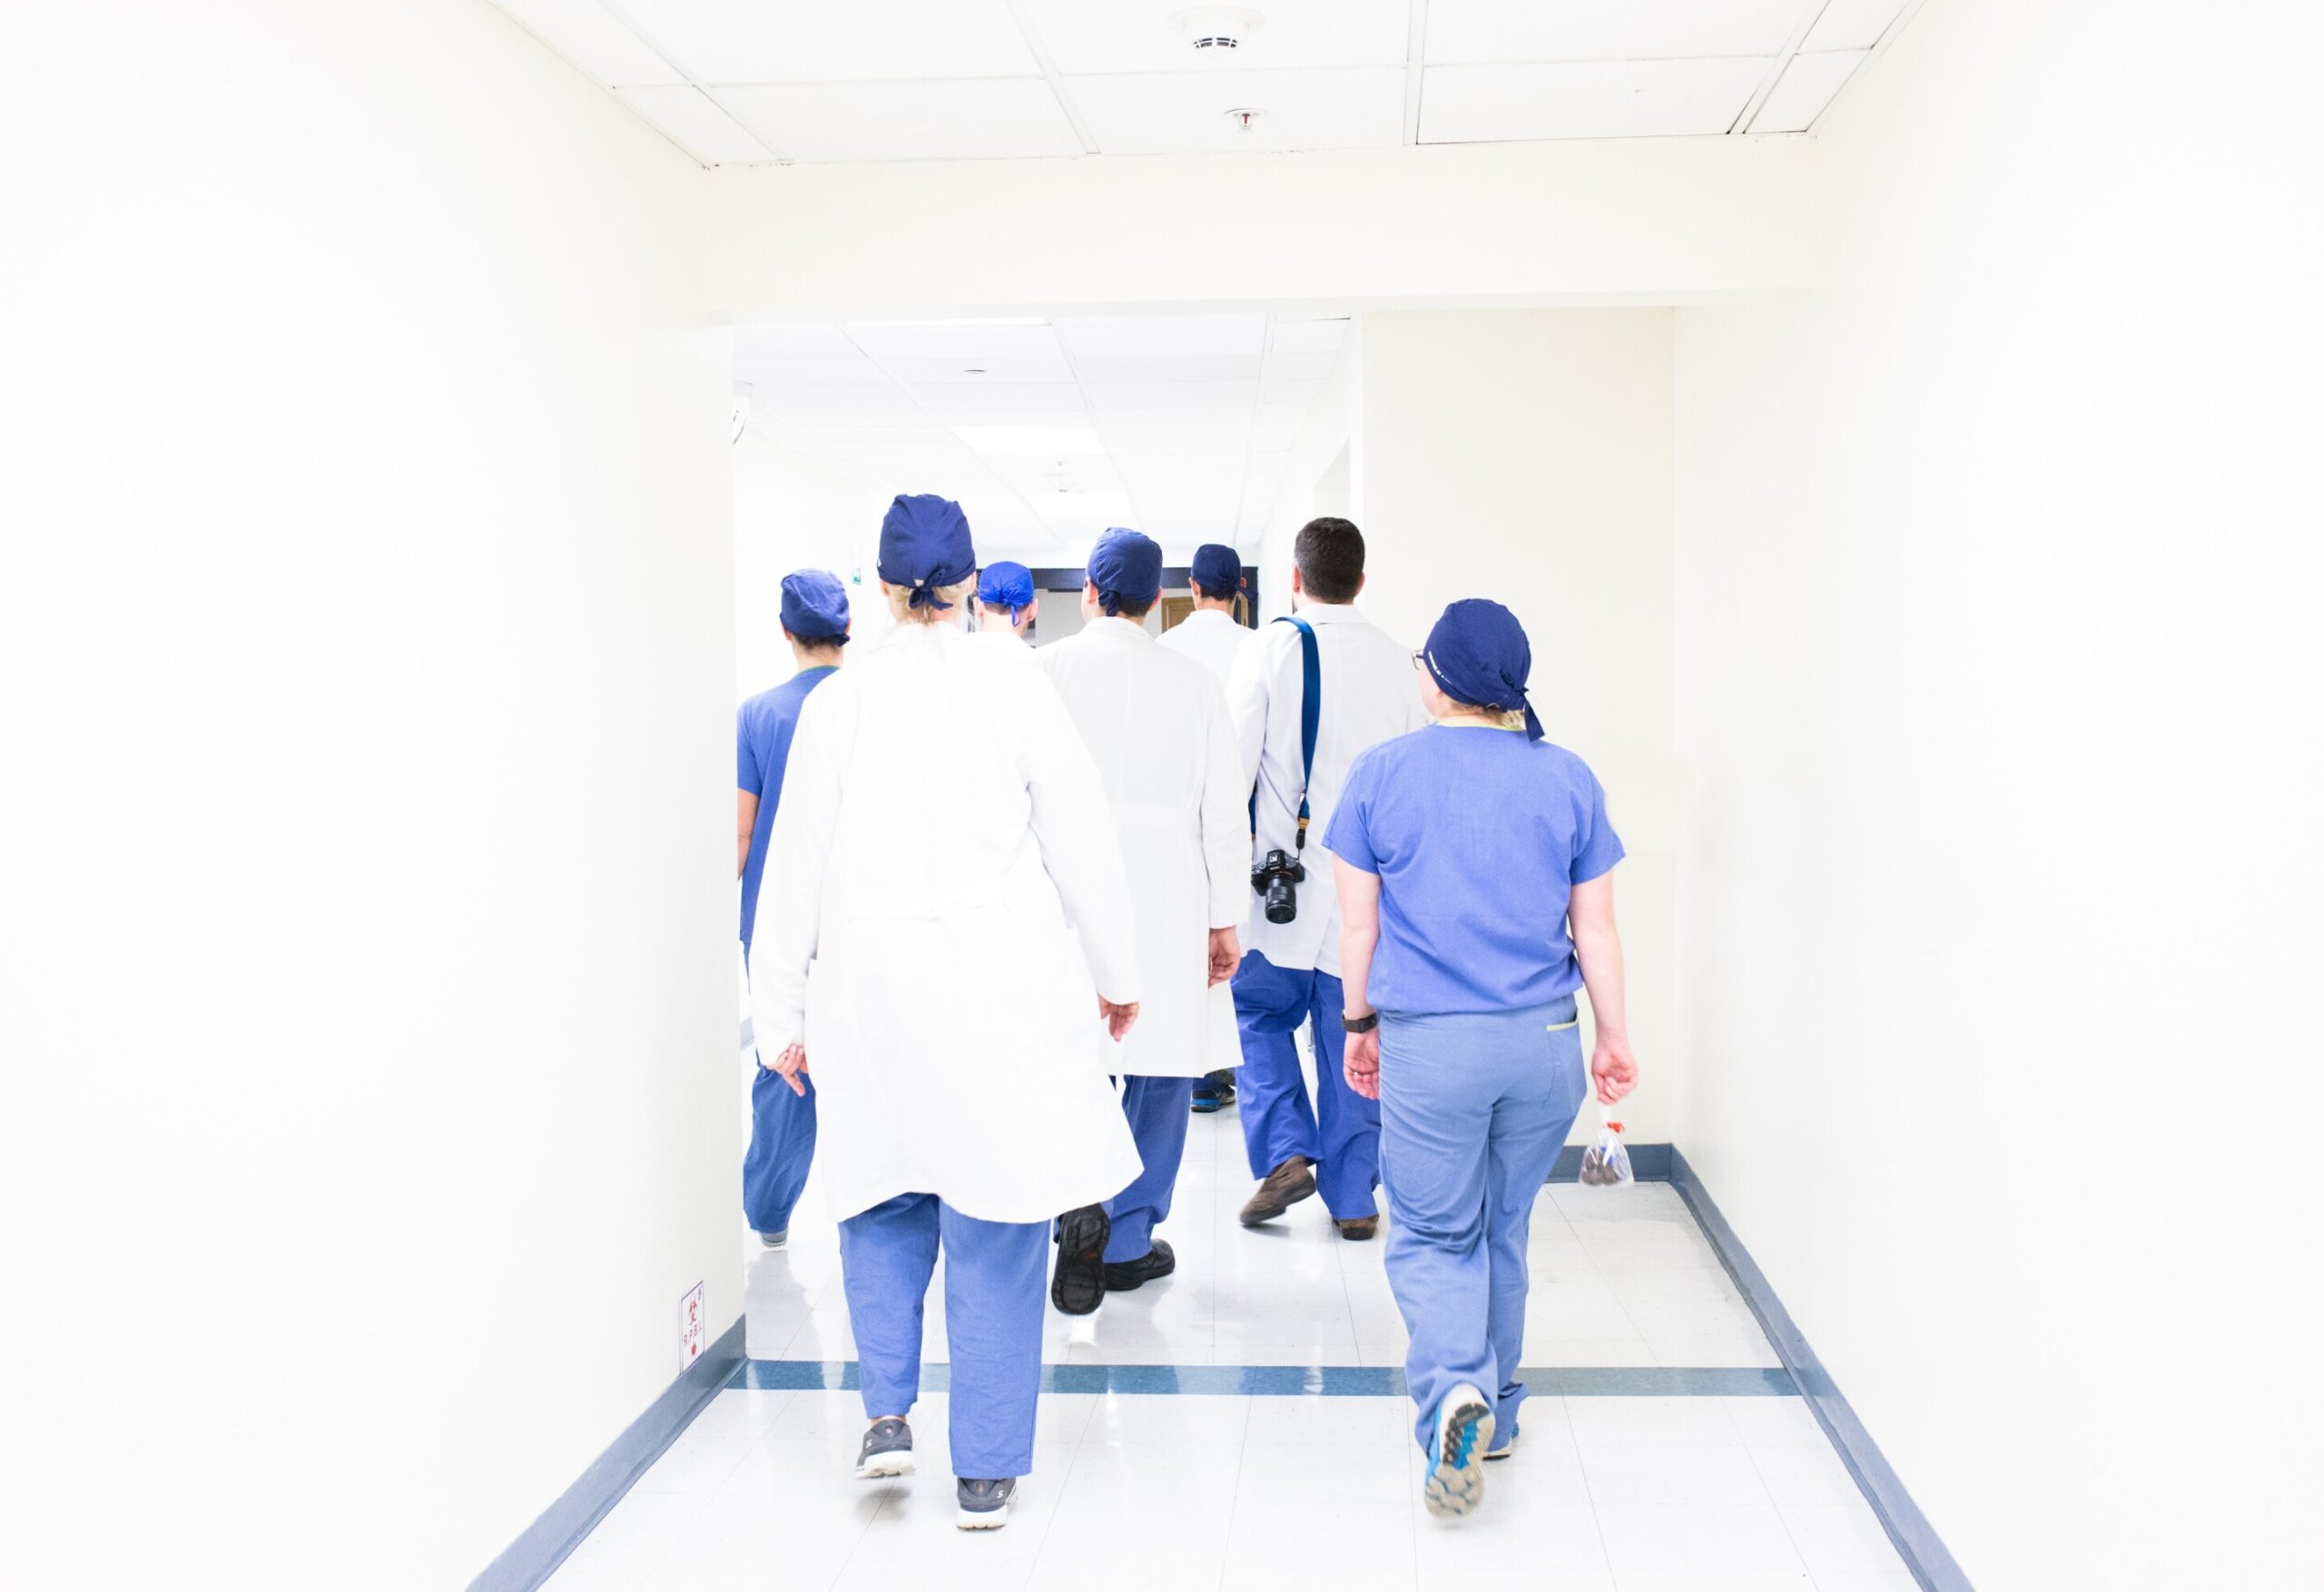 Positive emotional skills combat burnout among healthcare workers